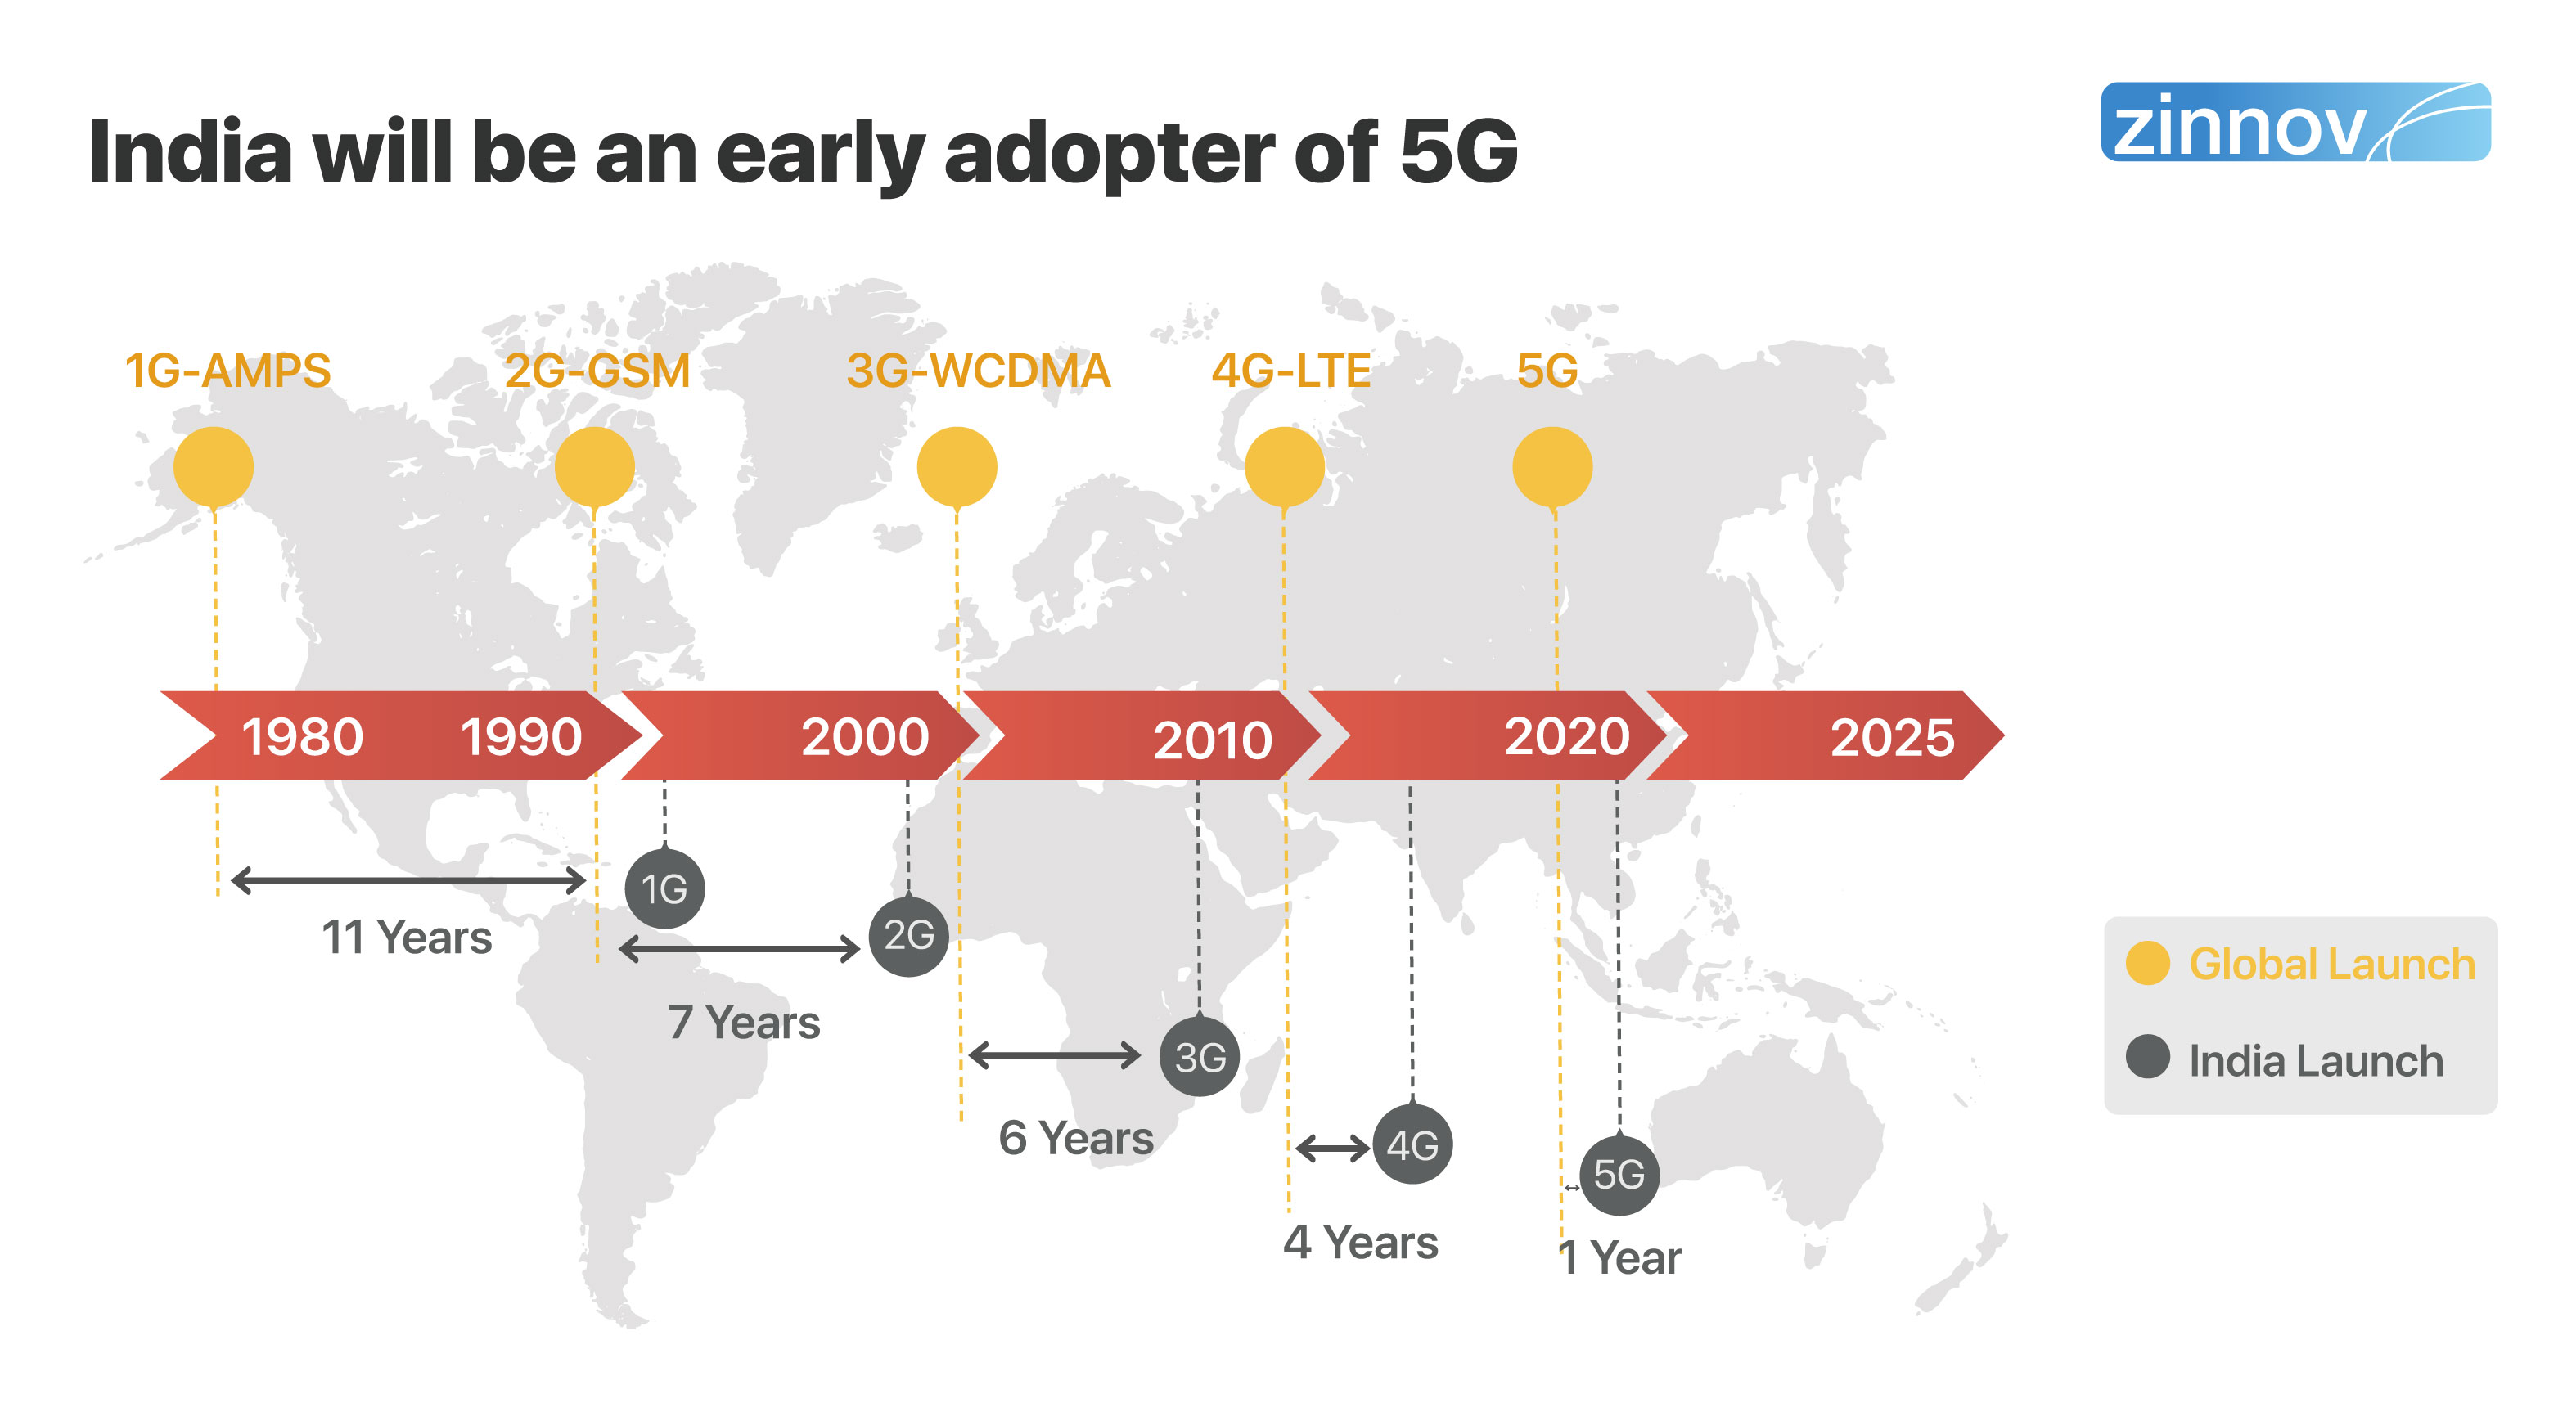 India will be an early adopter of 5G